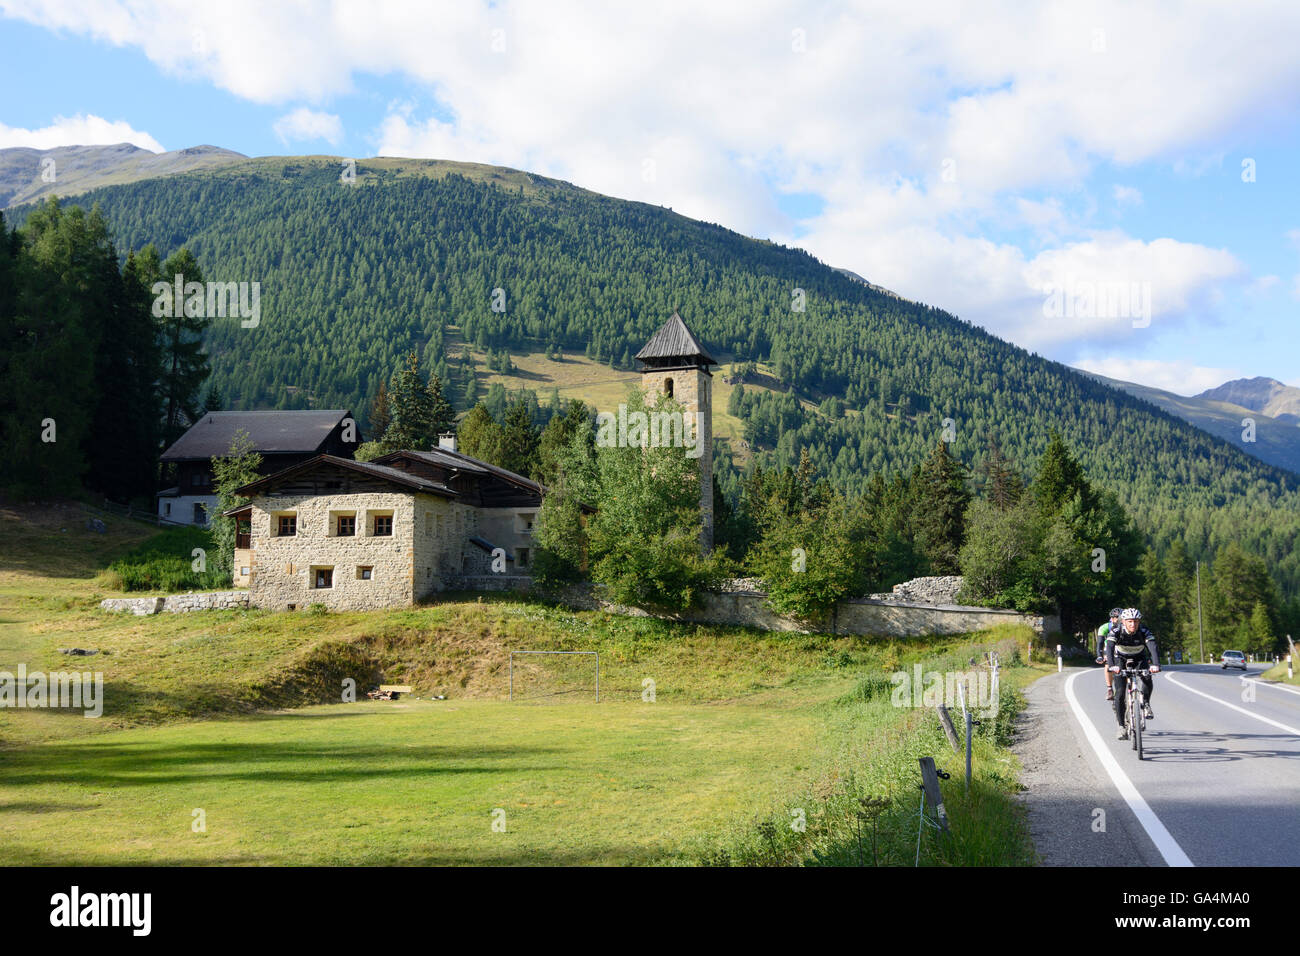 S-chanf Tower and ruins of the former hospice Chapella Via Valtellina Switzerland Graubünden, Grisons Oberengadin, Upper Engadin Stock Photo